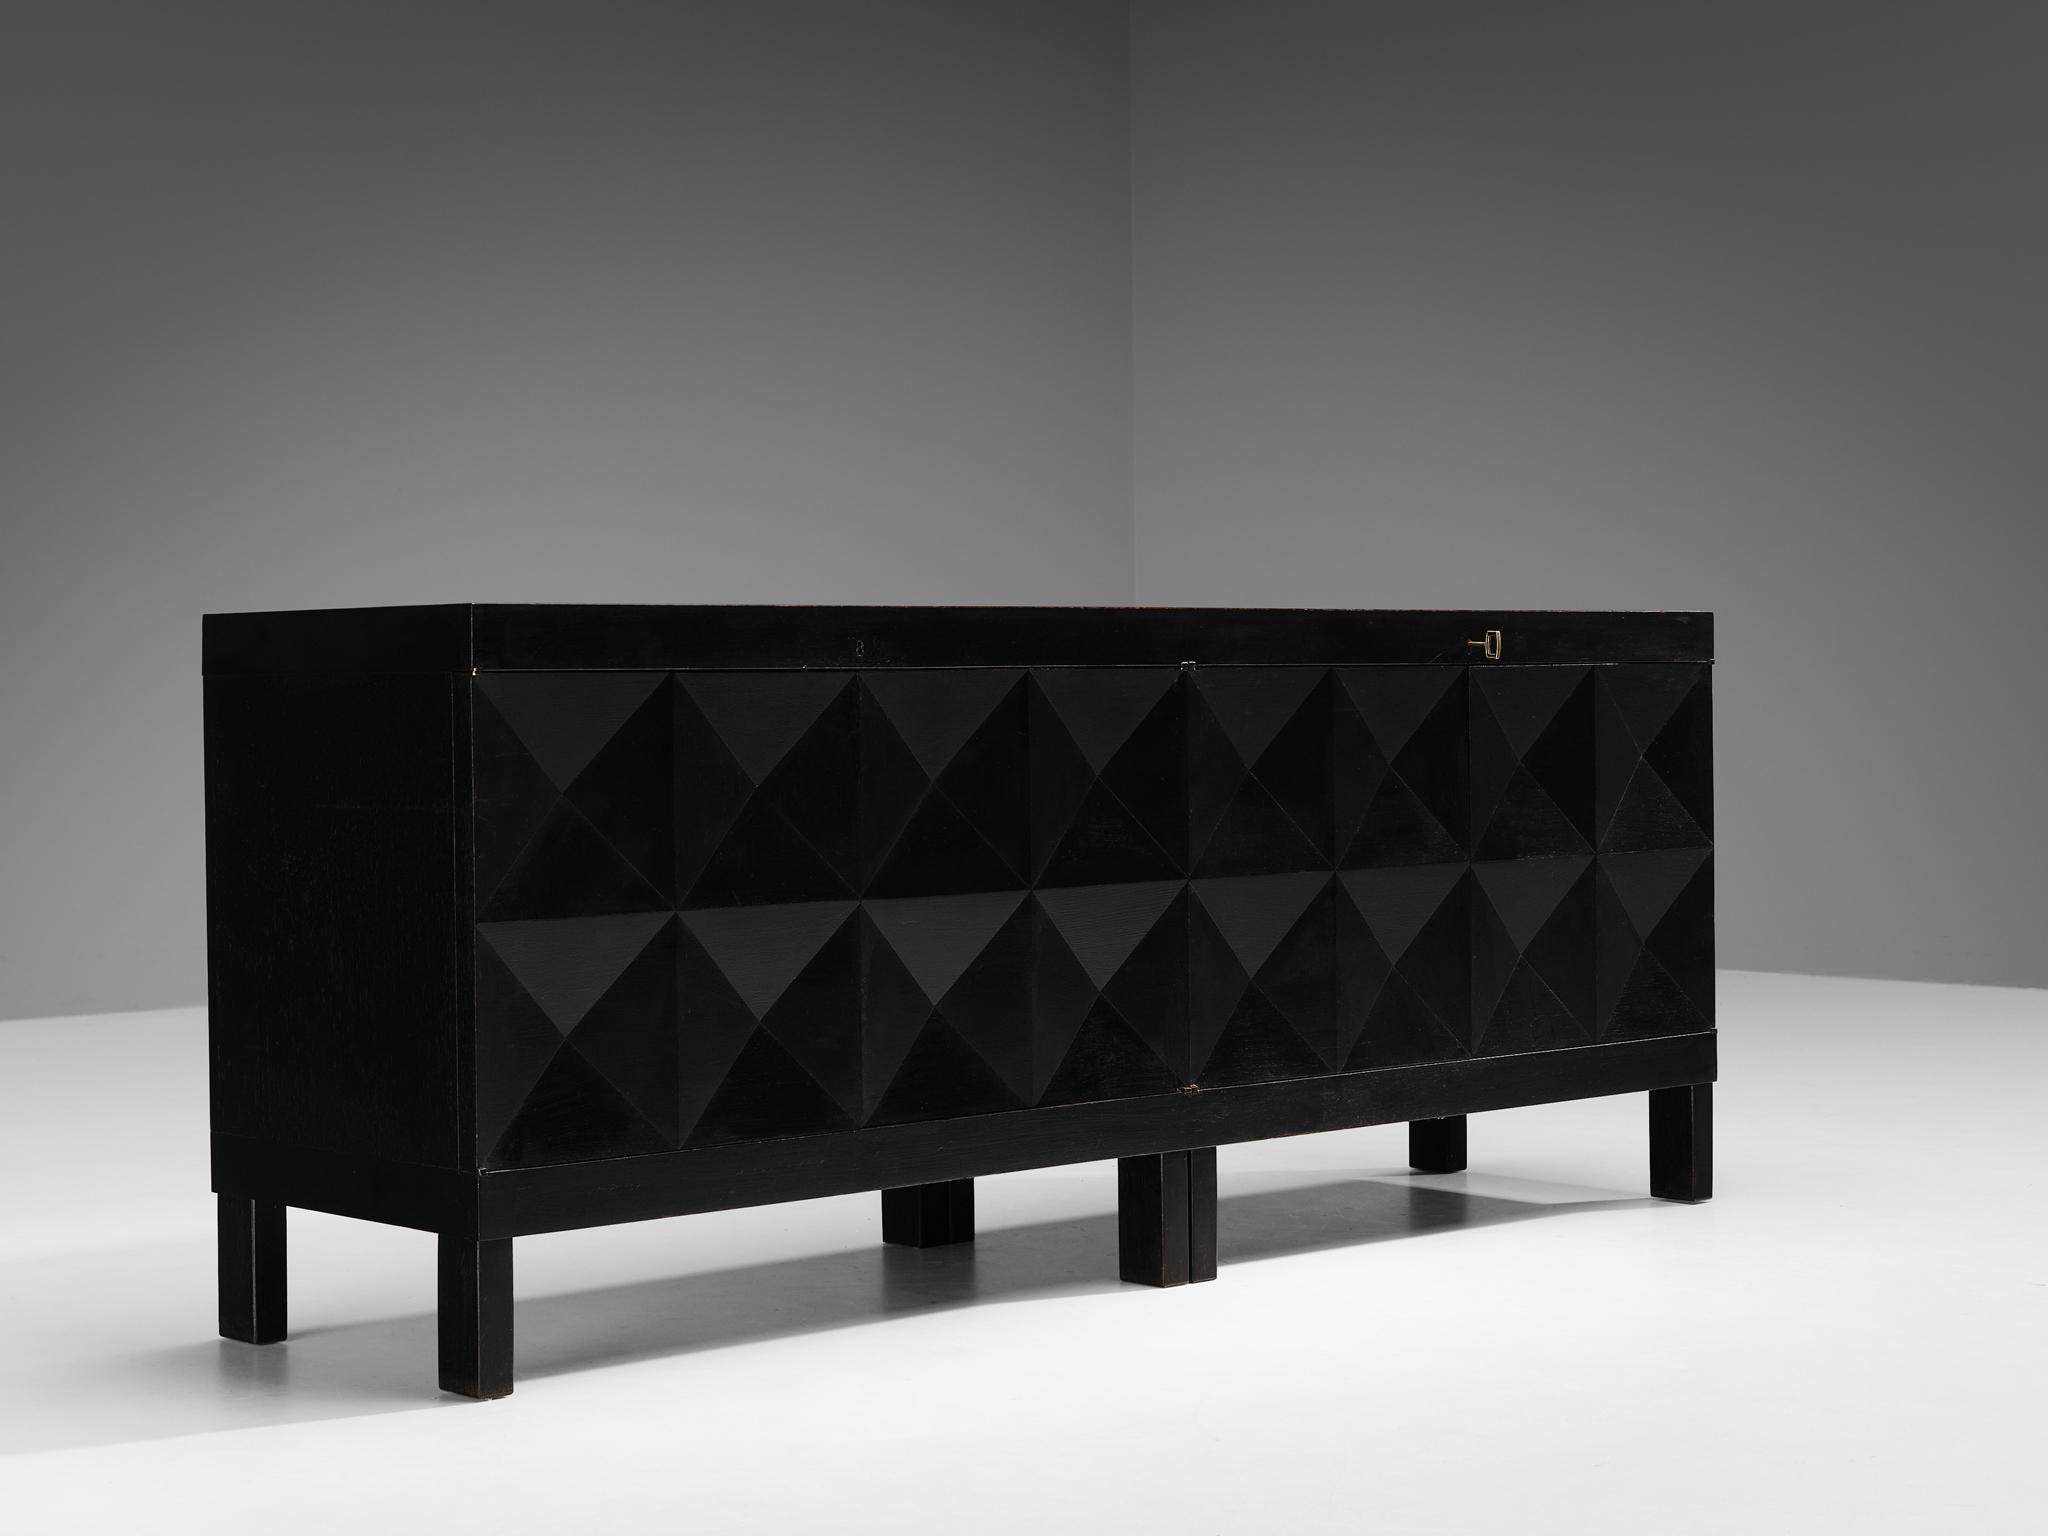 Sideboard, lacquered oak, brass, Belgium, 1970s. 

This graphic sideboard features a clear rhythm and flow established by means of a well-thought-out lay out that is utterly well-balanced. The carved geometric lines on the door panels immediately